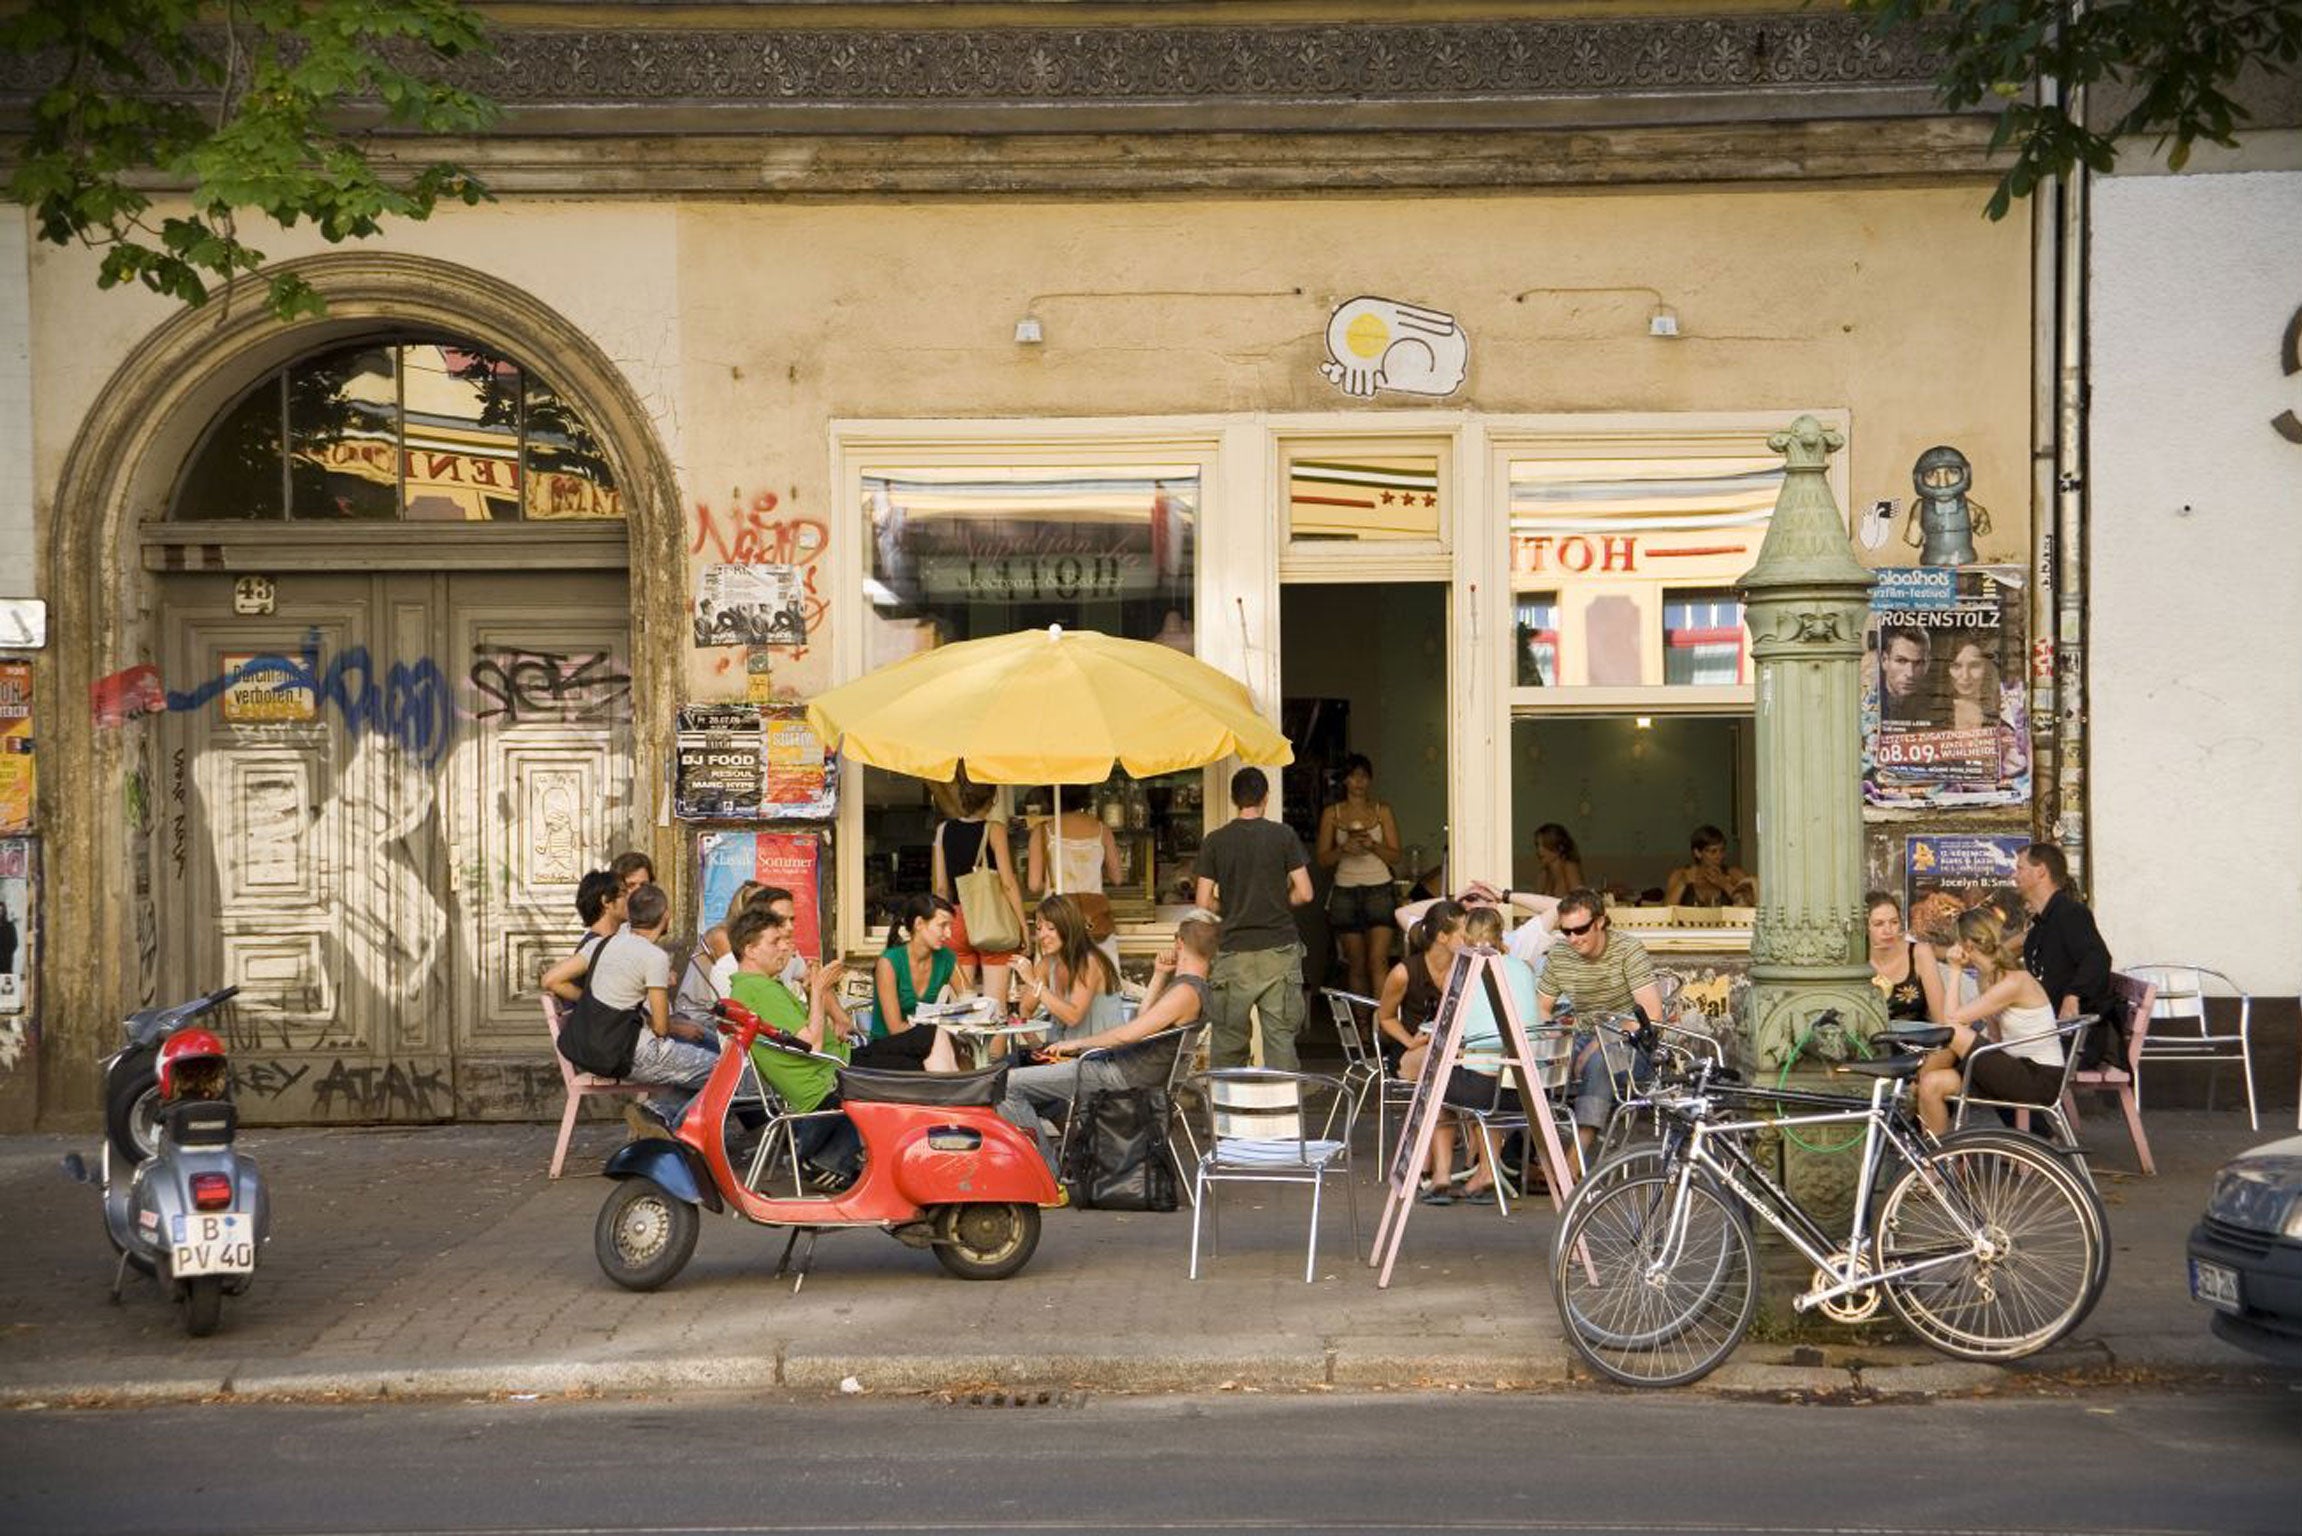 Streets in the Prenzlauer Berg district will be free of vehicles next summer